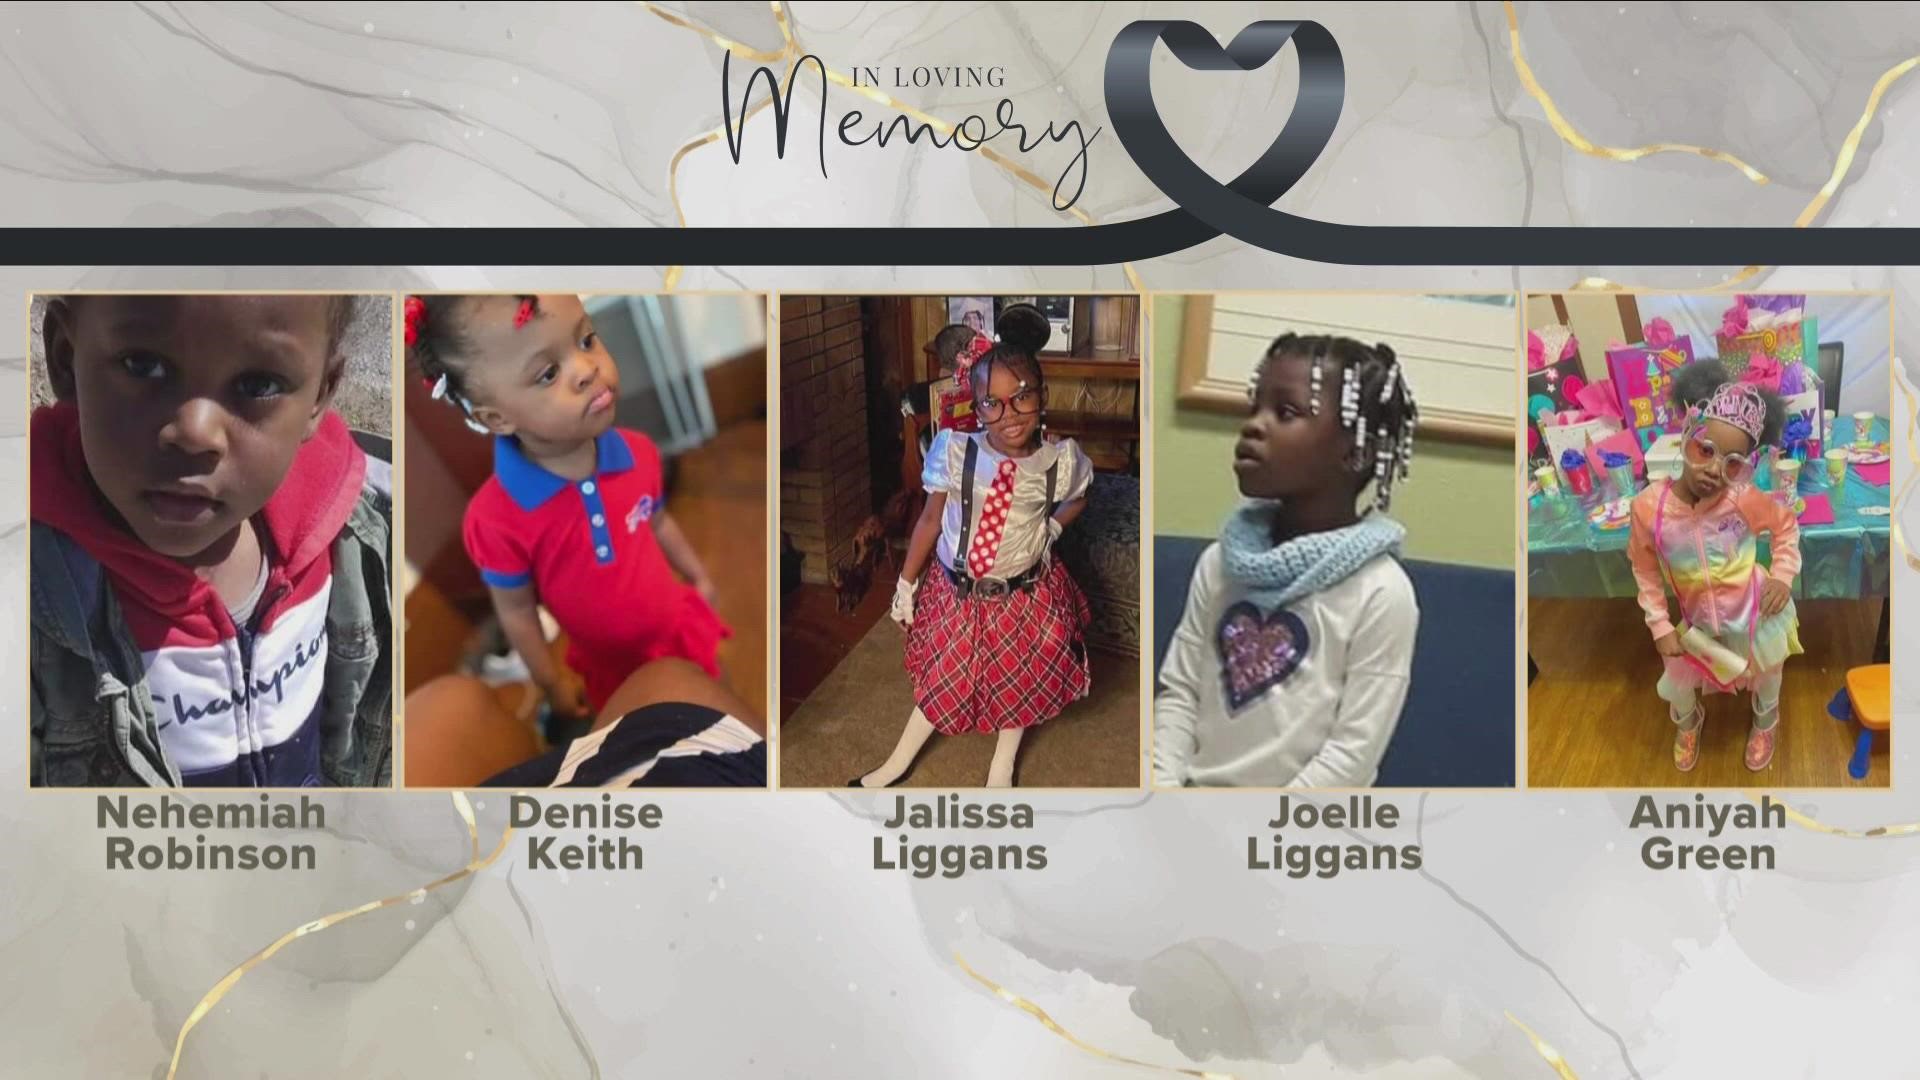 THE CHILDREN DIED IN A FIRE ON NEW YEAR'S EVE.THEIR GRANDMOTHER.... LISA LIGGANS... AS WELL AS A SEVEN-MONTH-OLD BABY WERE ALSO HURT.